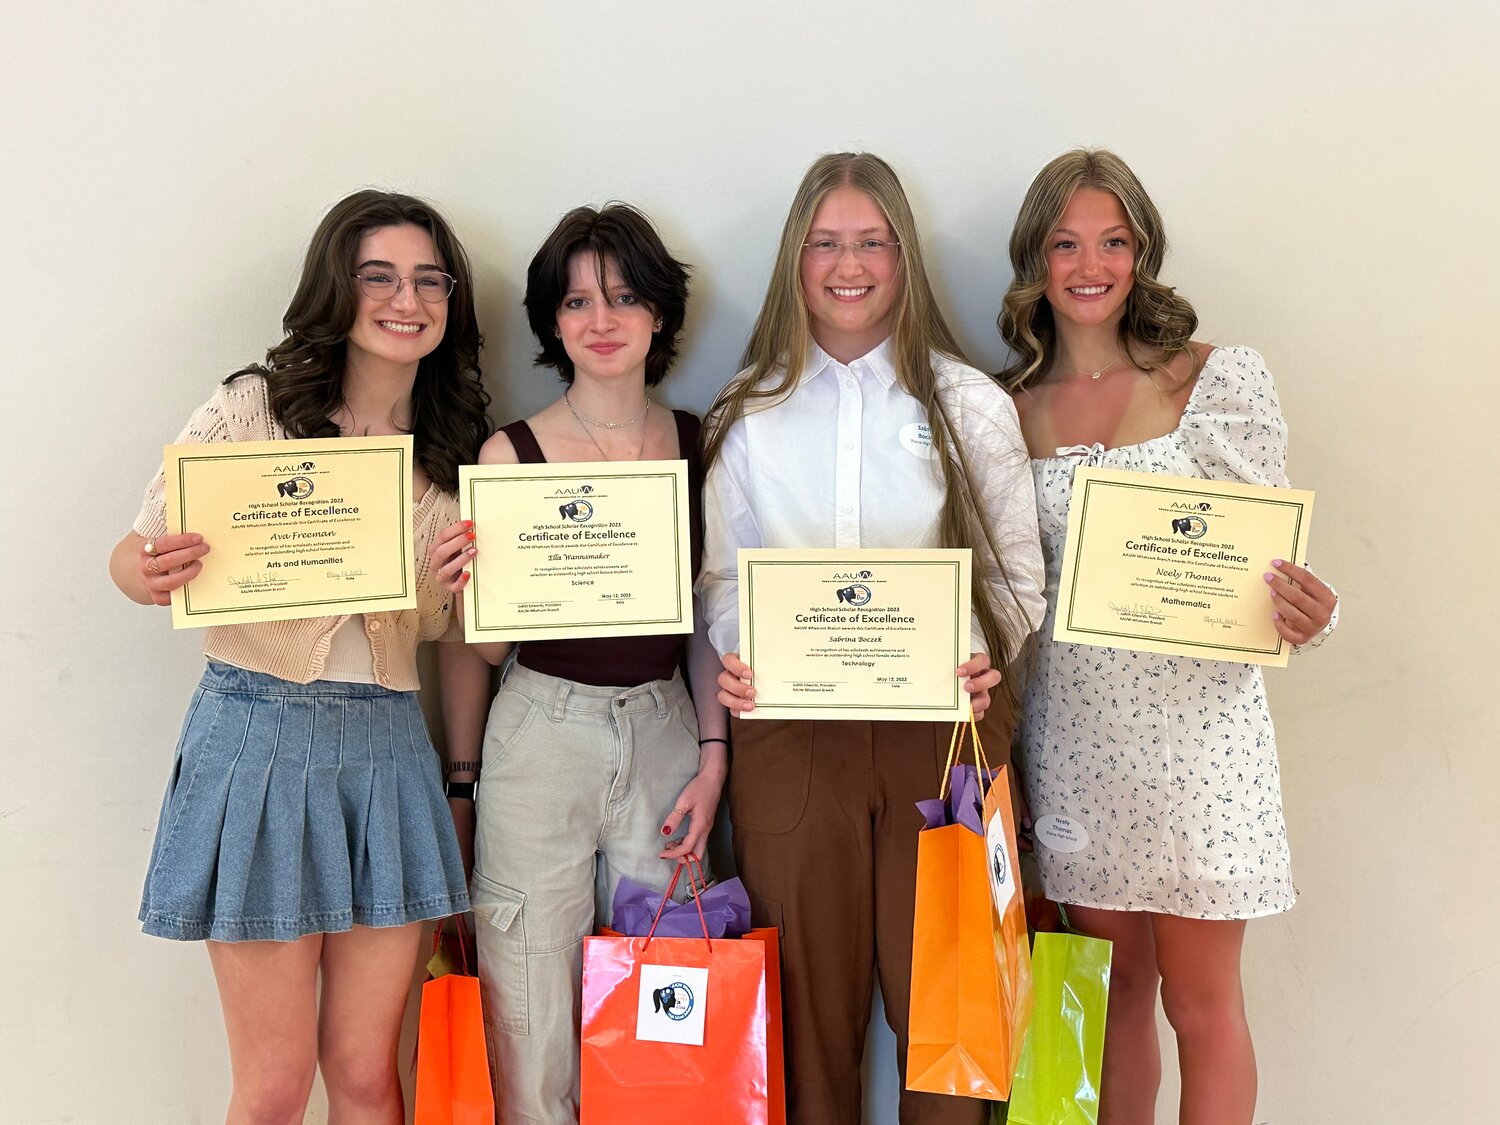 The American Association of University Women Whatcom Branch recognized four female students from several high schools in Whatcom County. From l.; the Blaine High School students who were recognized were Ava Freeman (arts), Ella Wannamaker (science), Sabrina Boczek (technology) and Neely Thomas (math).